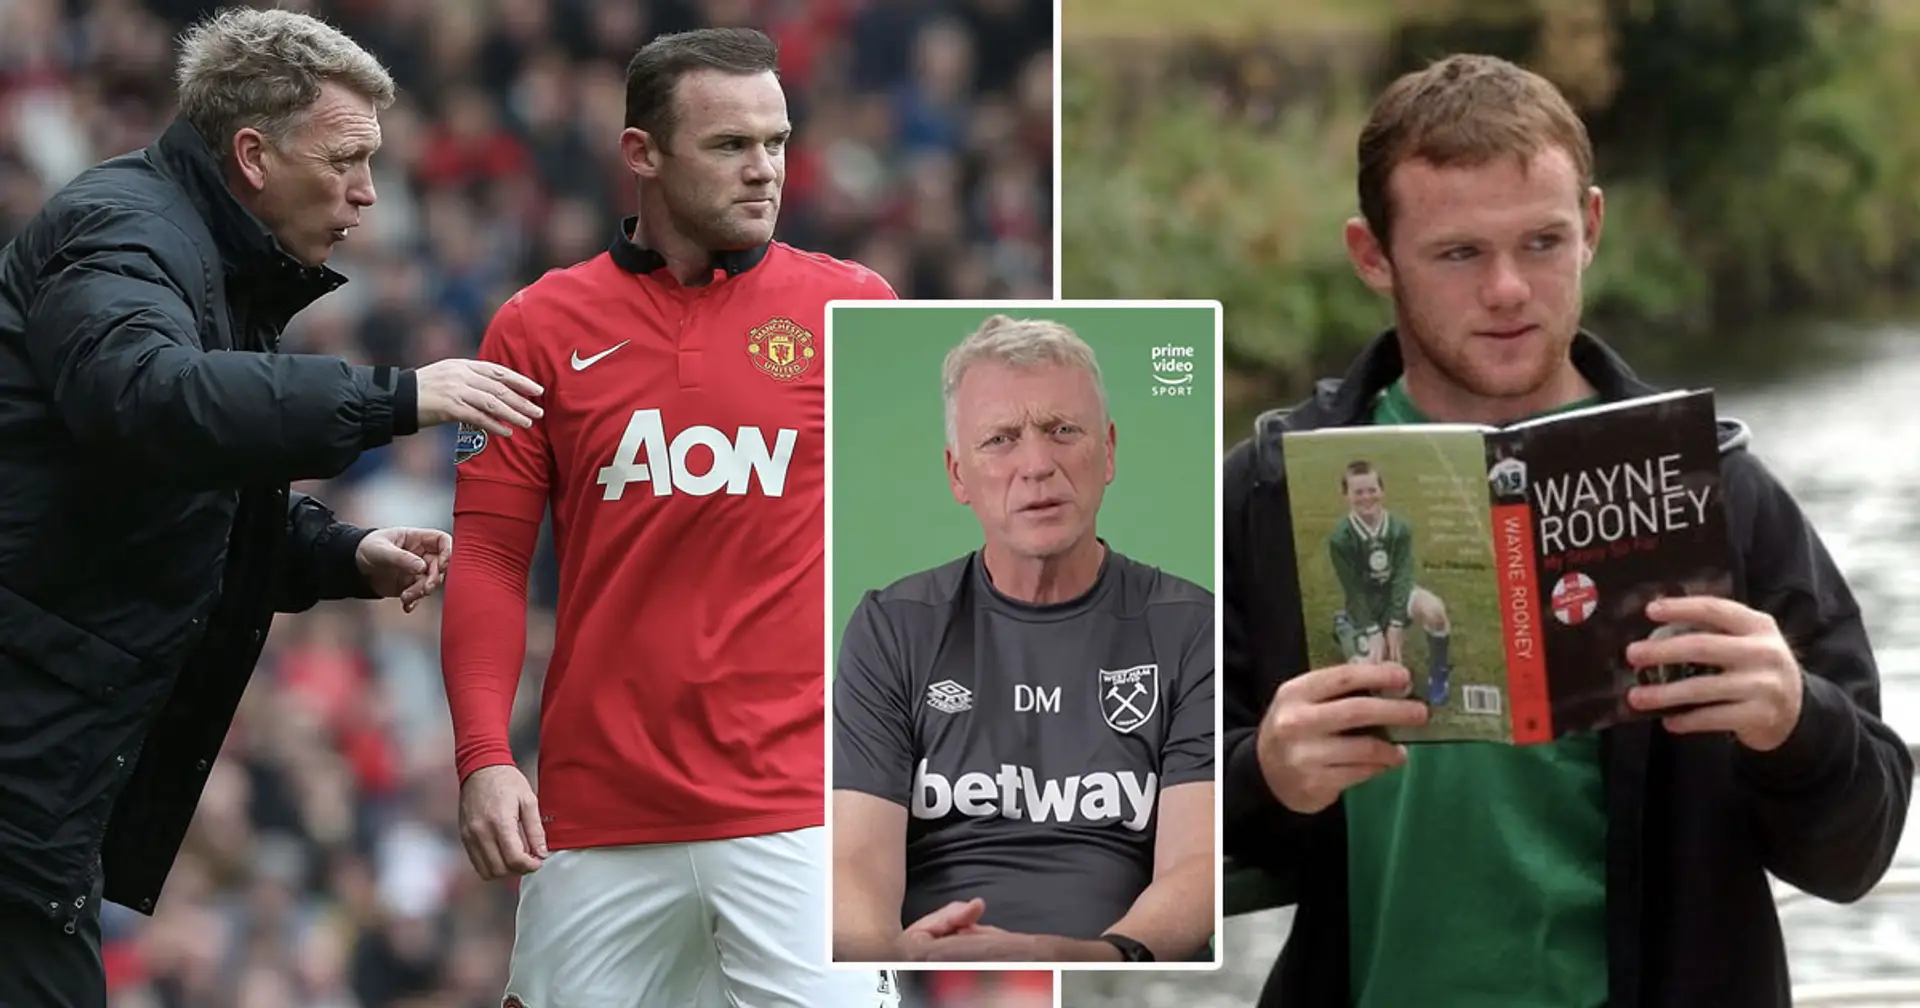 David Moyes wants Rooney back in his team: recalling how he tried to sue Wayne in 2008